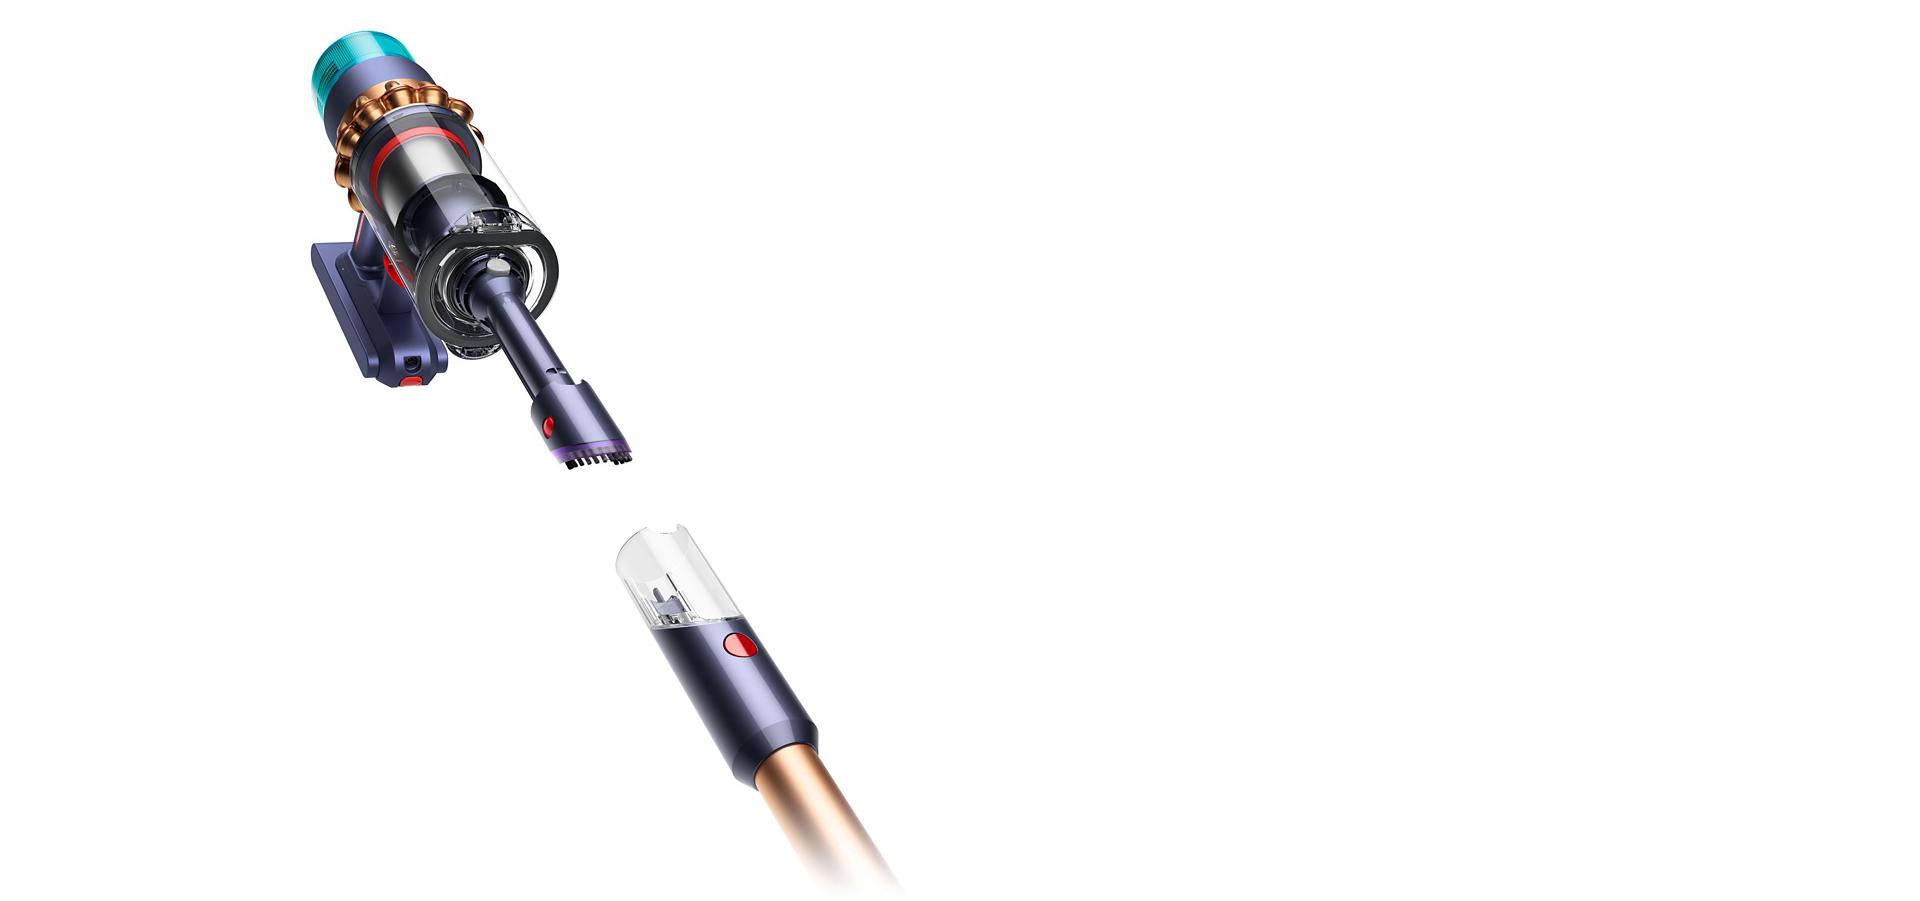 The Dyson Gen5detect shown with its Built-in dusting and crevice tool.